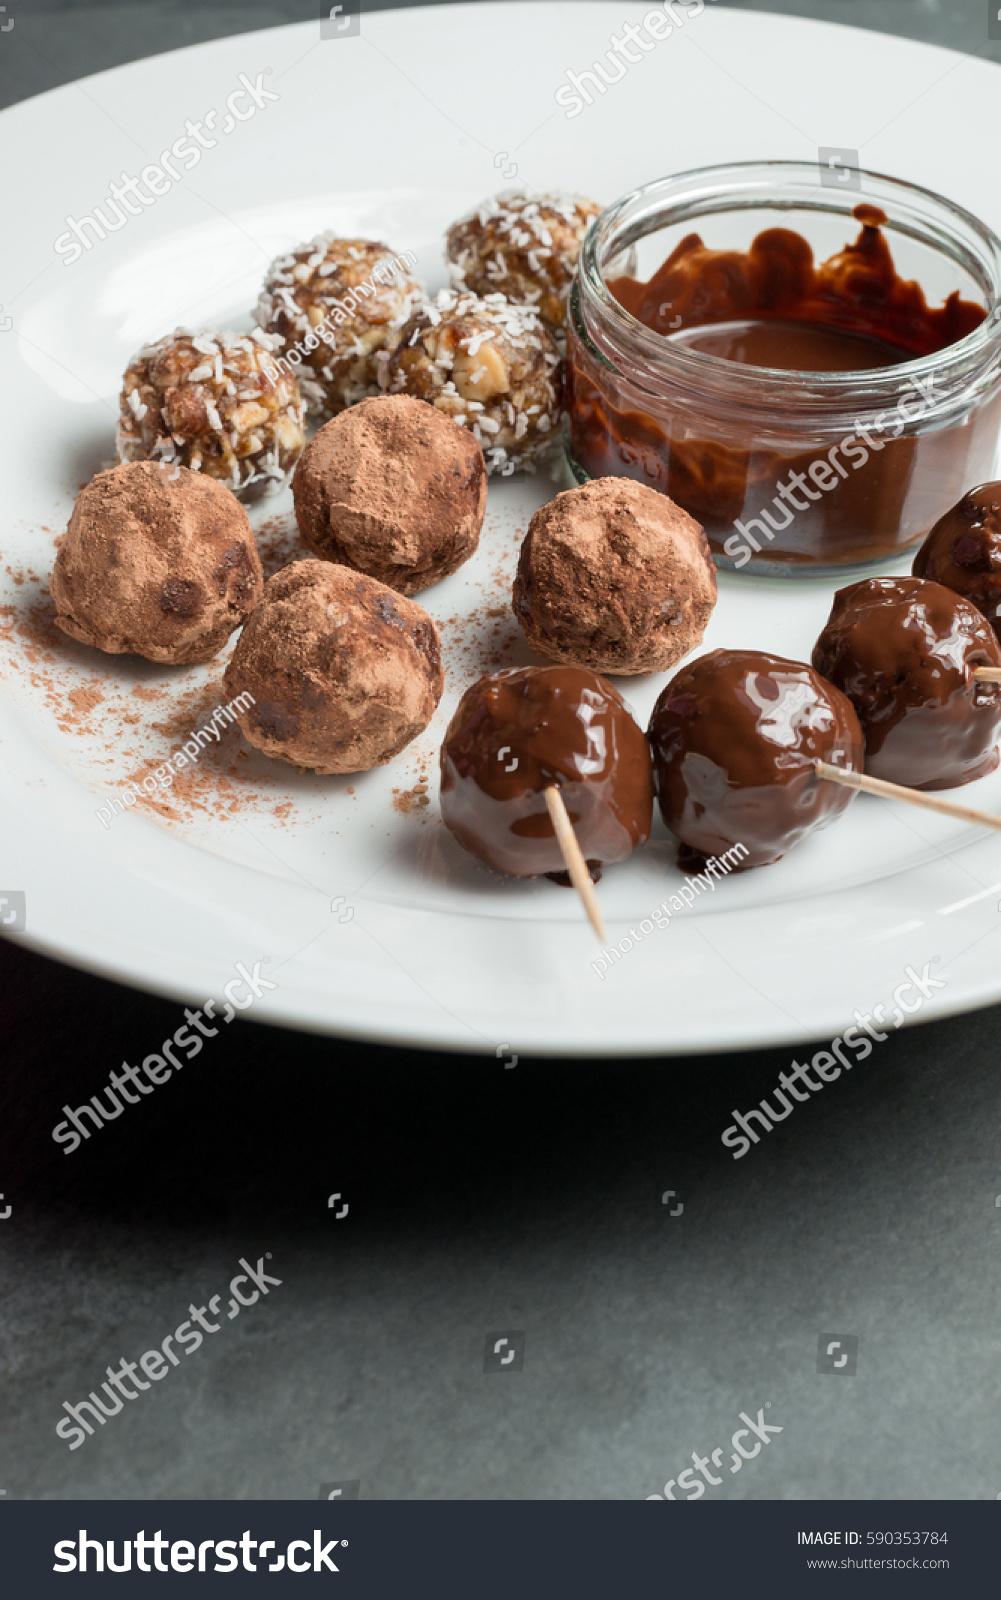 Protein Energy Balls Melted Chocolate Dip Food And Drink Stock Image 590353784,Cake Glaze